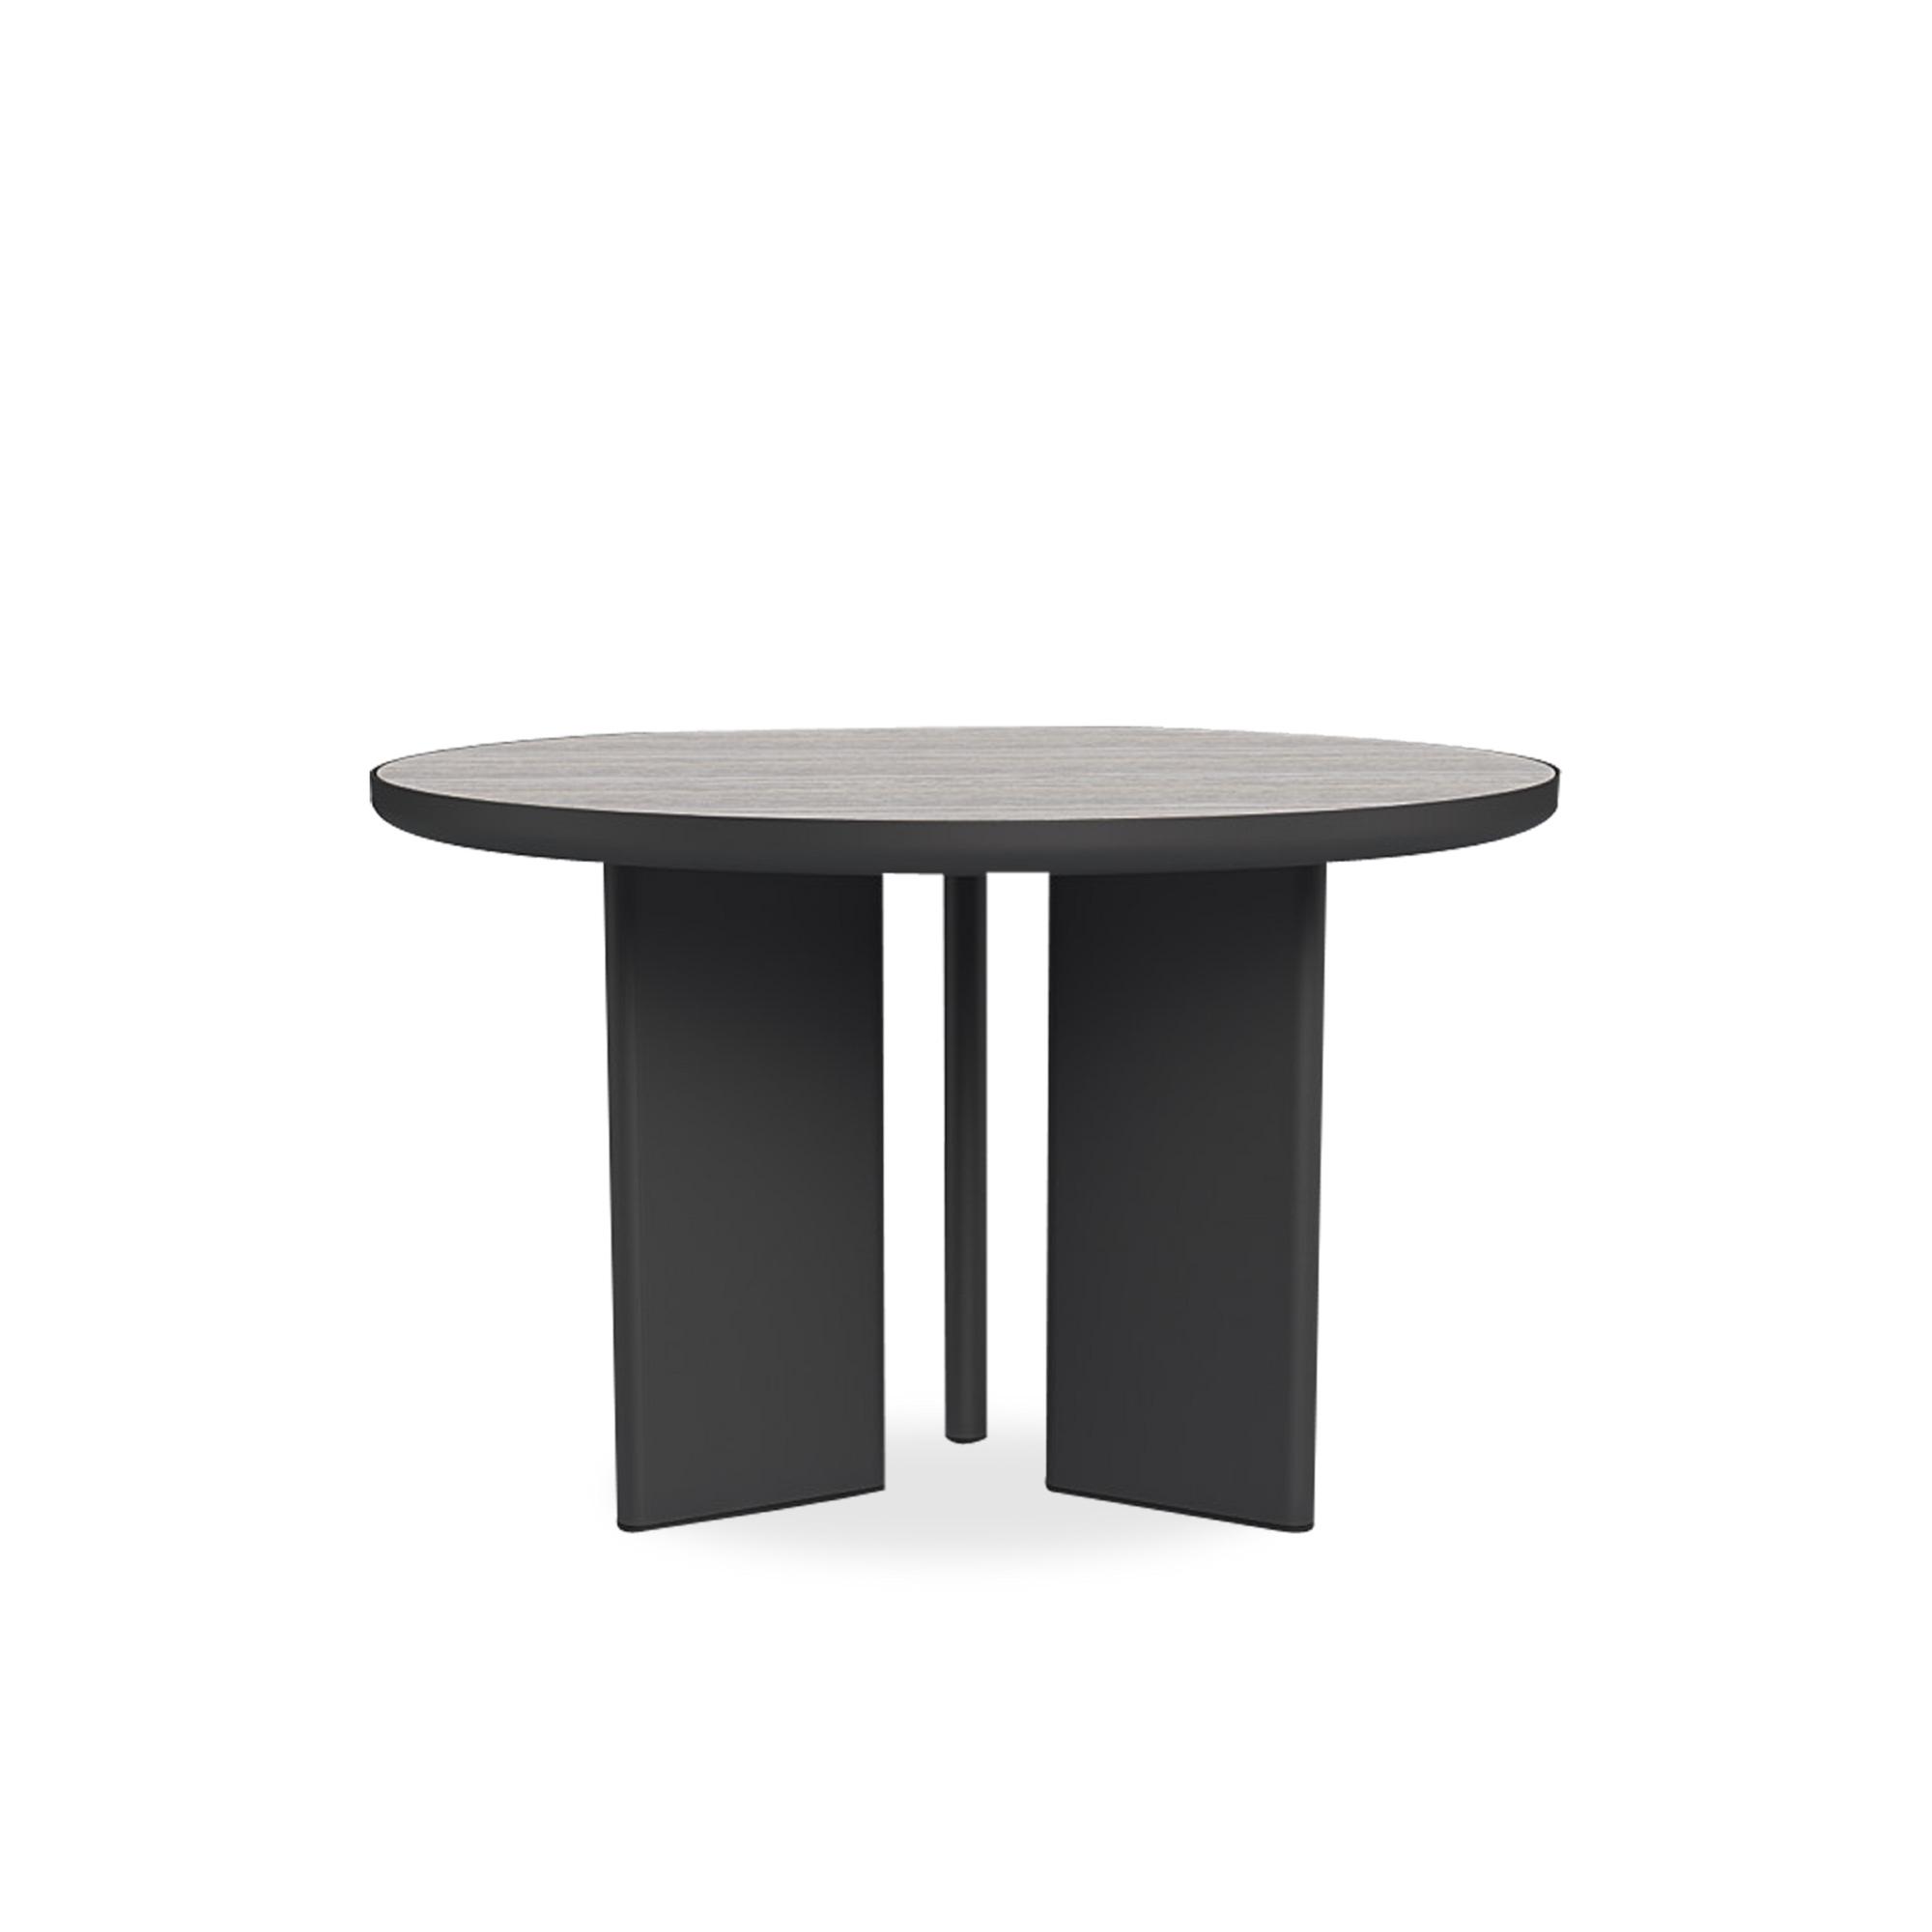 Bringing an indoor aesthetic to the outdoors, the Moab Round Dining Table uses the finest materials to create sophisticated outdoor dining.